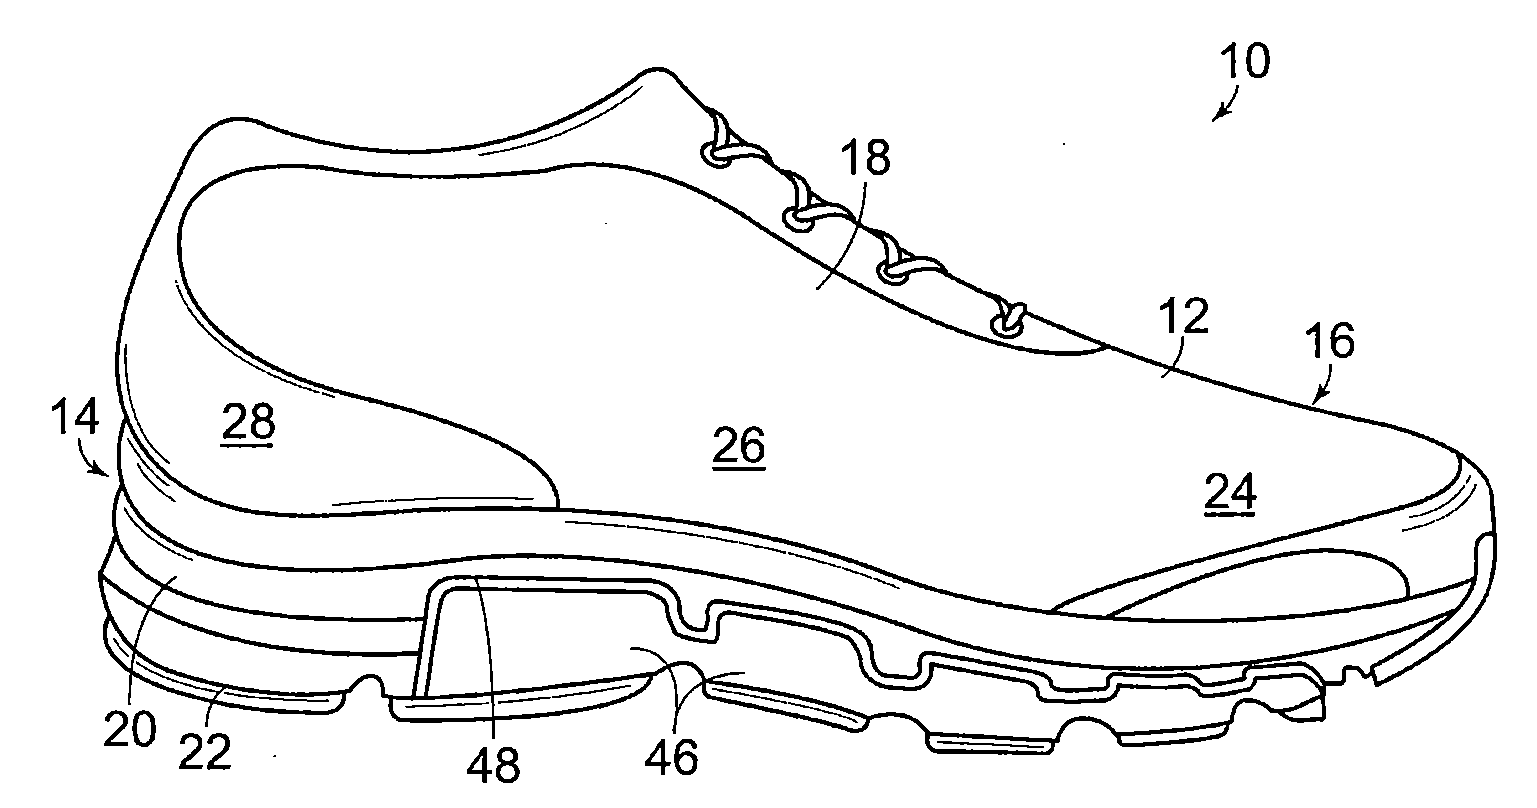 Article of footwear with midsole having higher density peripheral portion